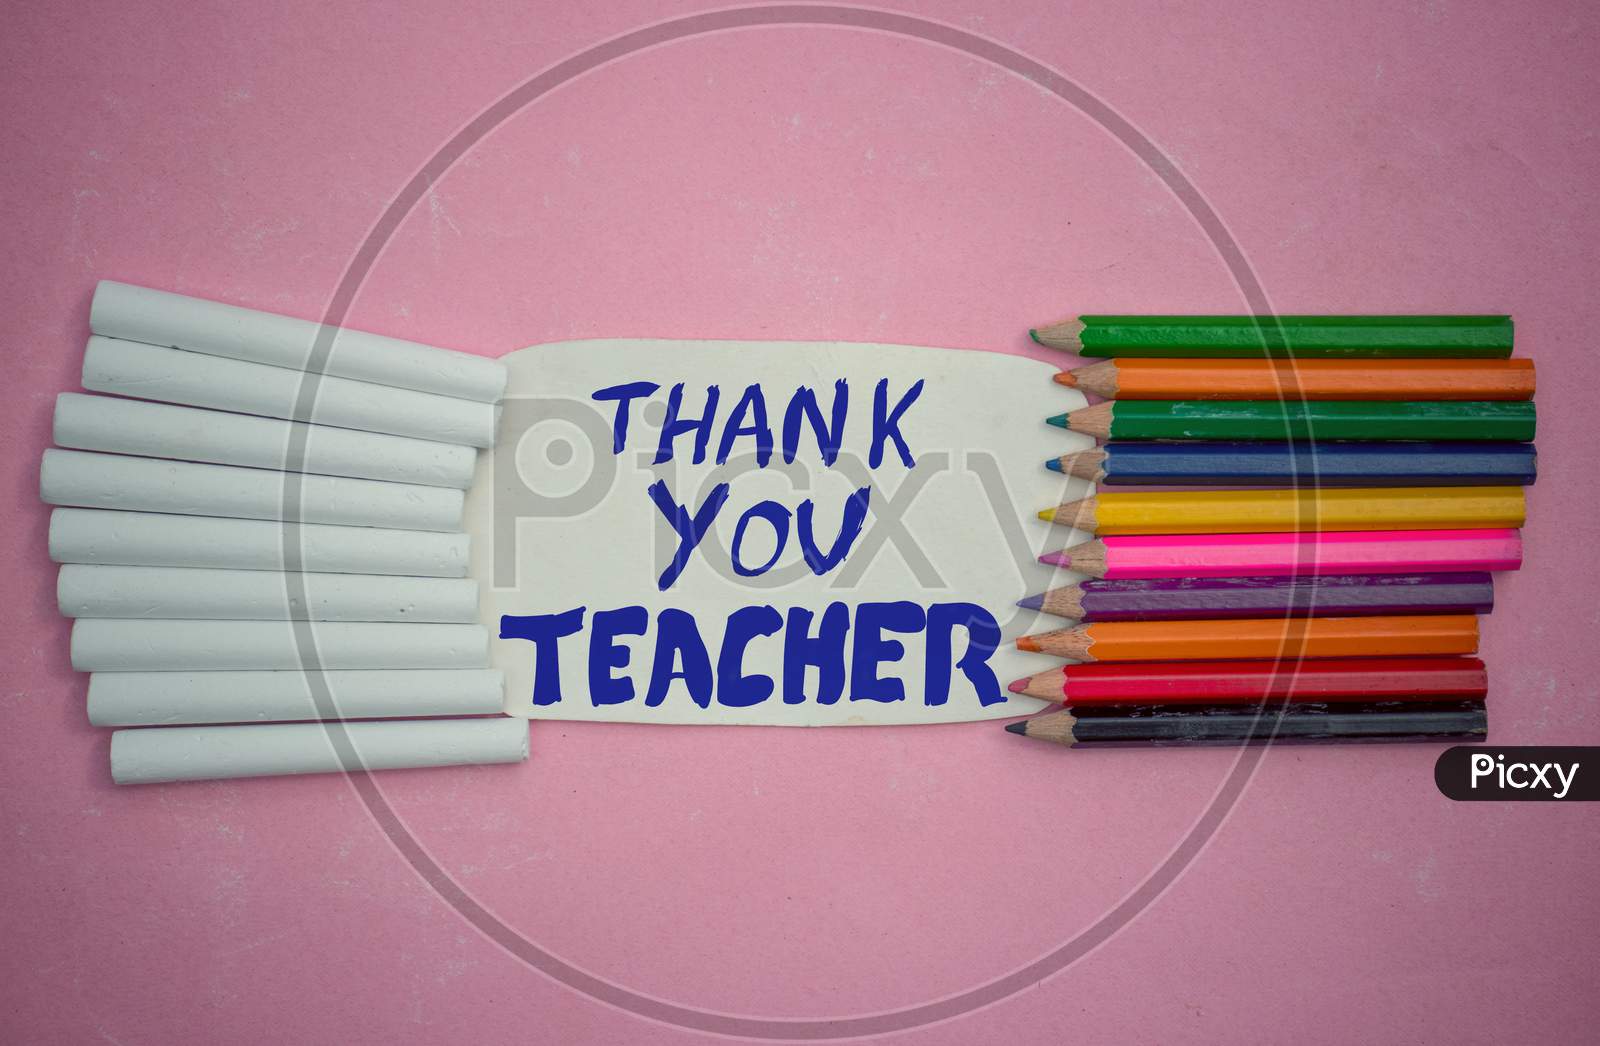 Thank You Teacher Written On Paper Note With Color Pencils And White Chalk, Happy Teacher's Day Conceptual Photo